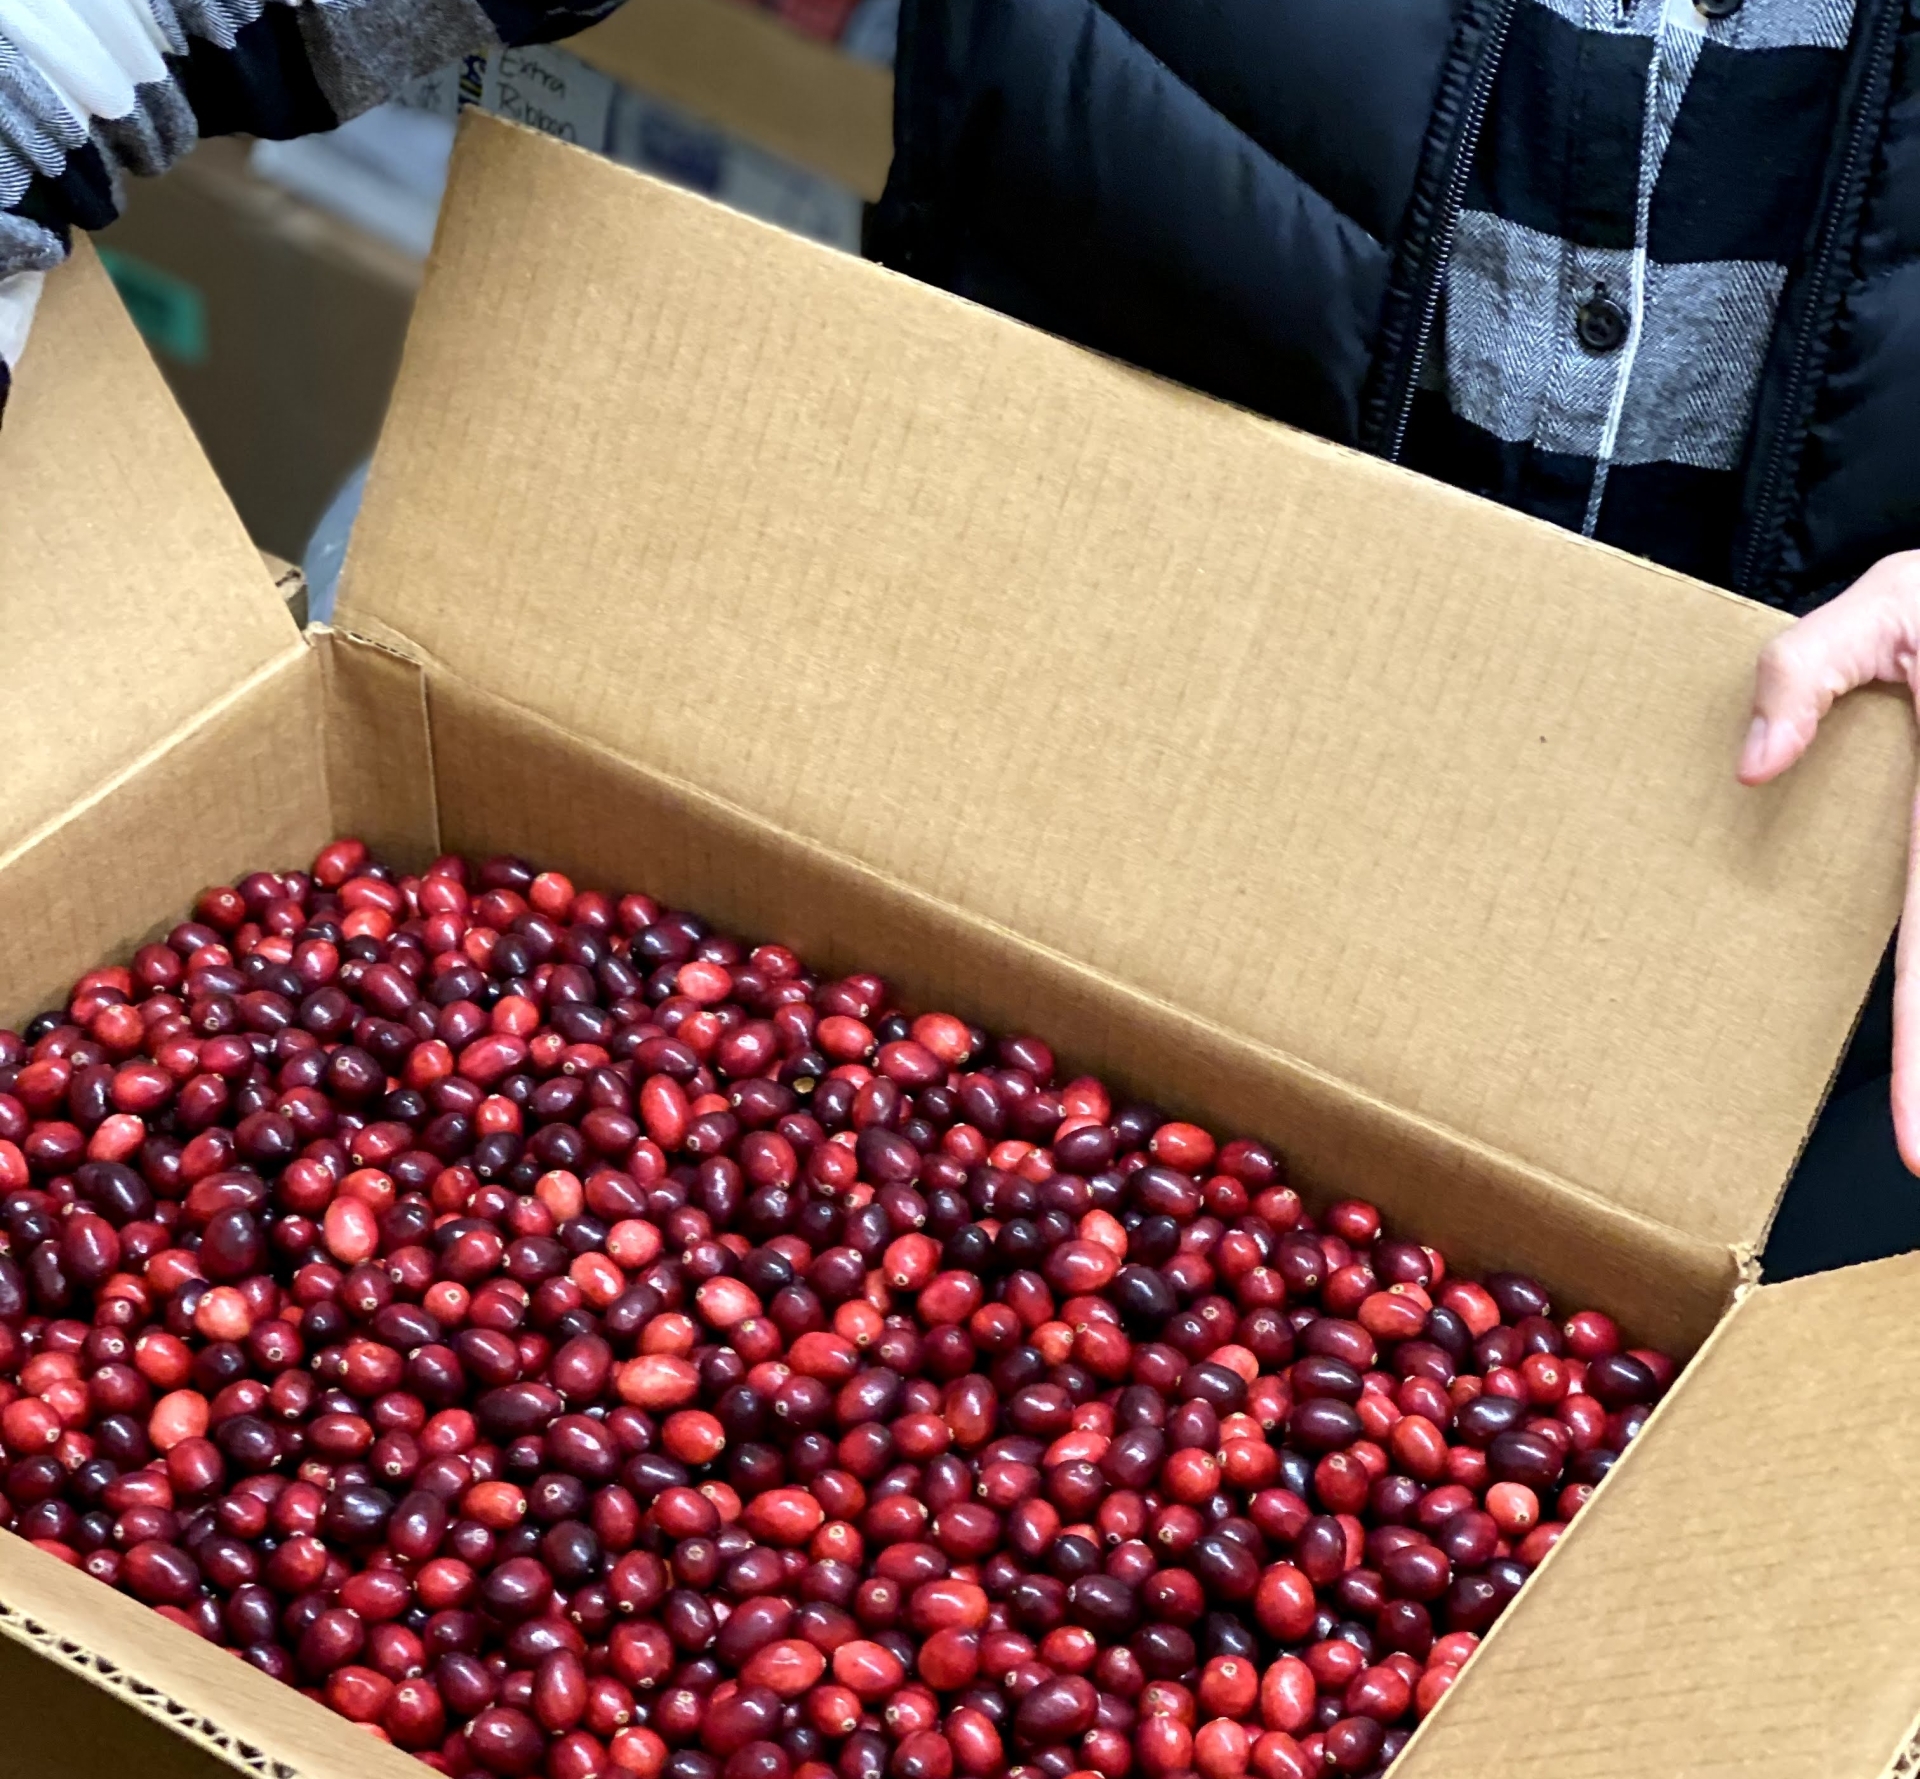 Packaging Fresh Cranberries for Sale